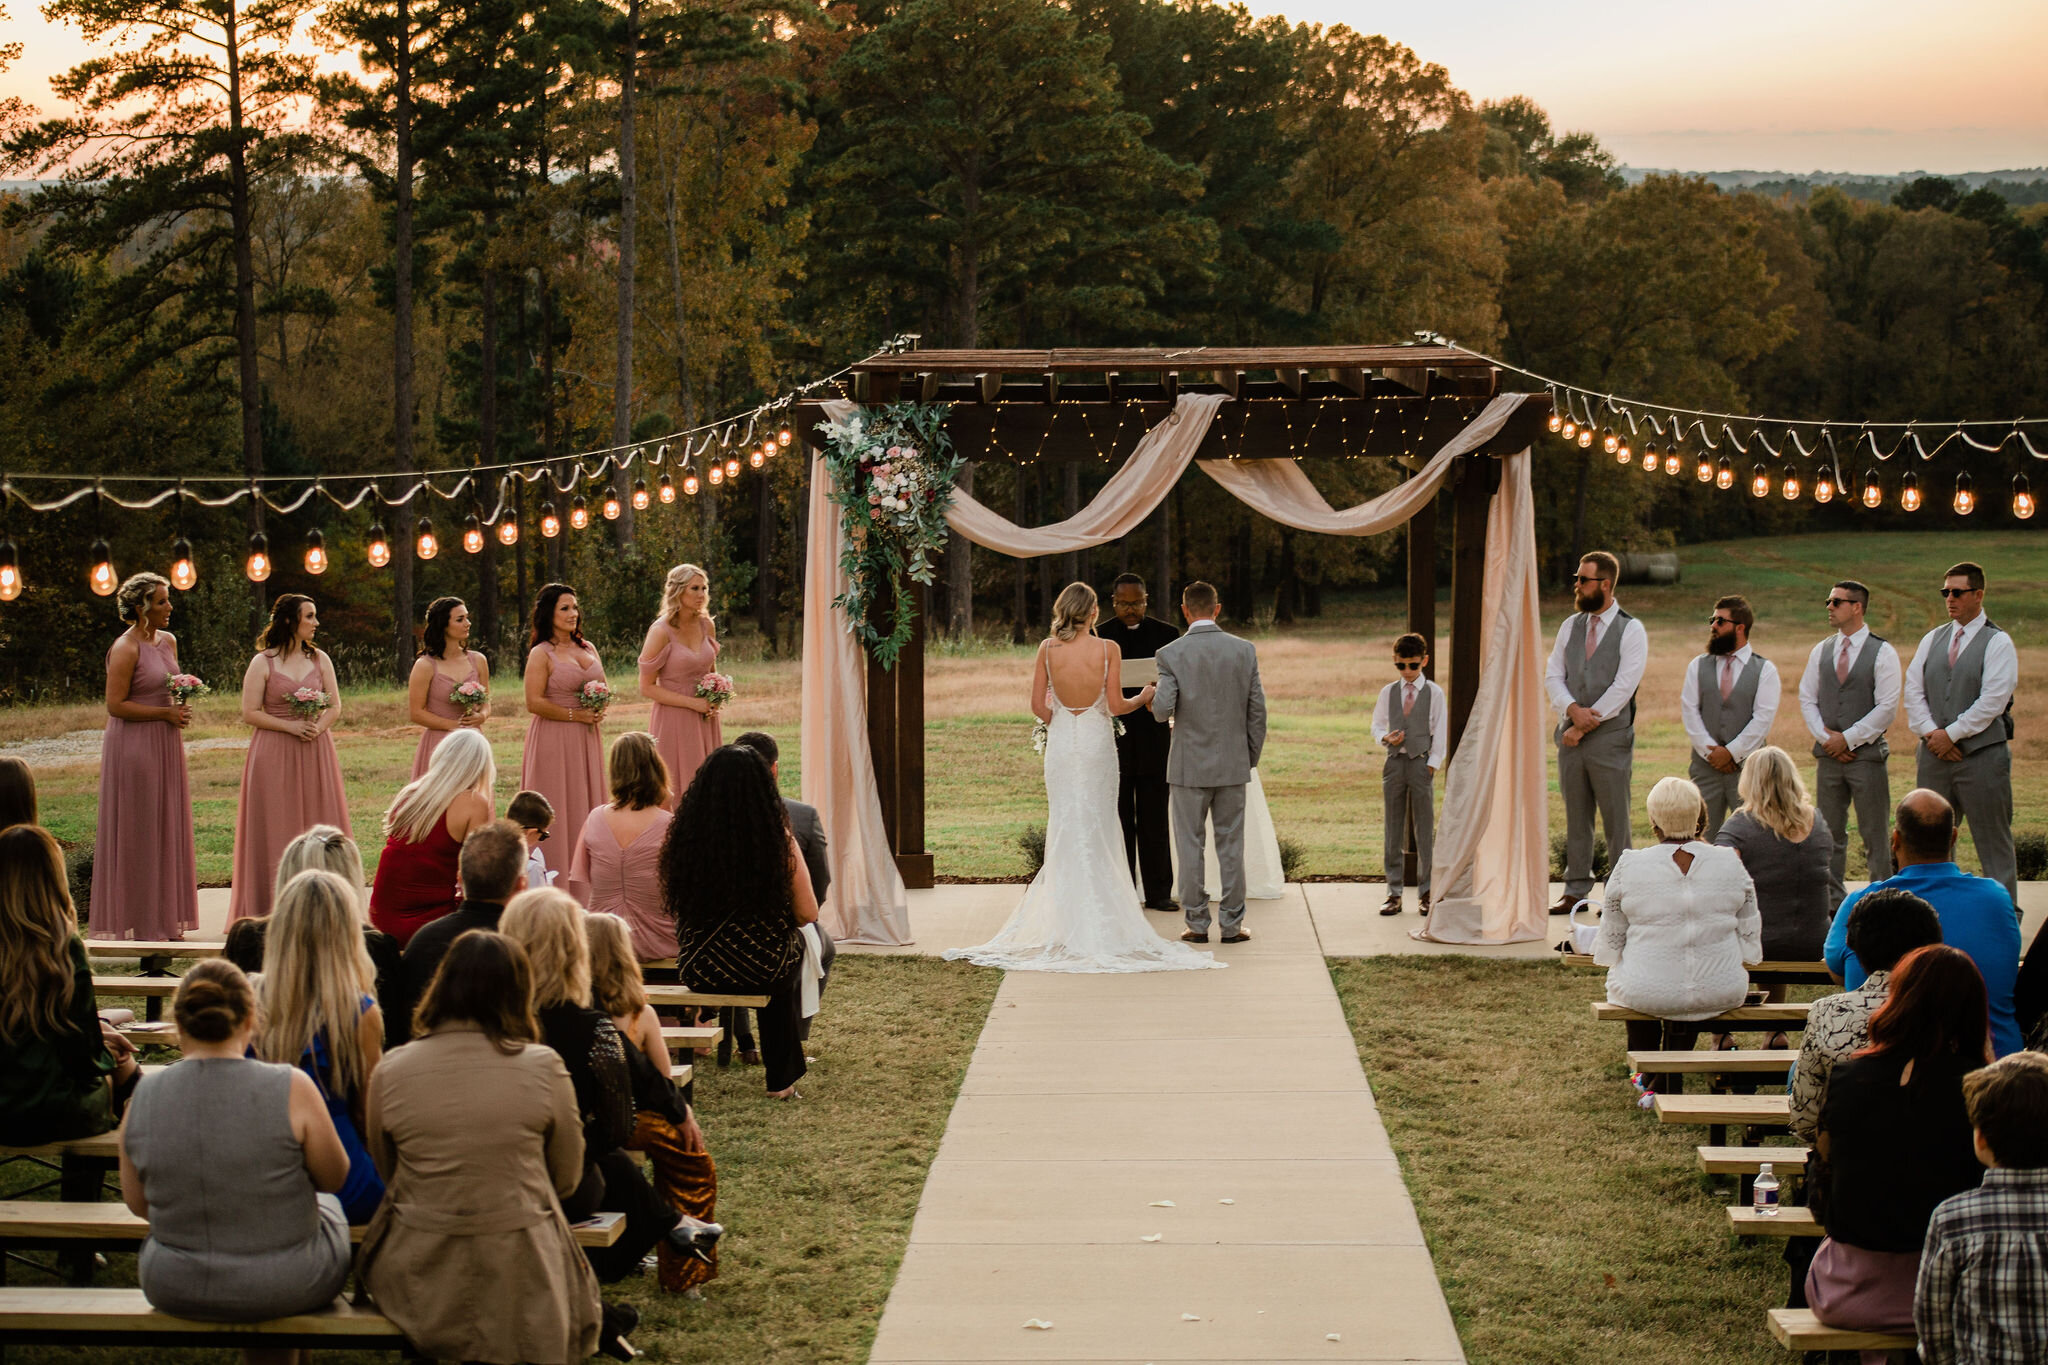 What time should my wedding ceremony start?